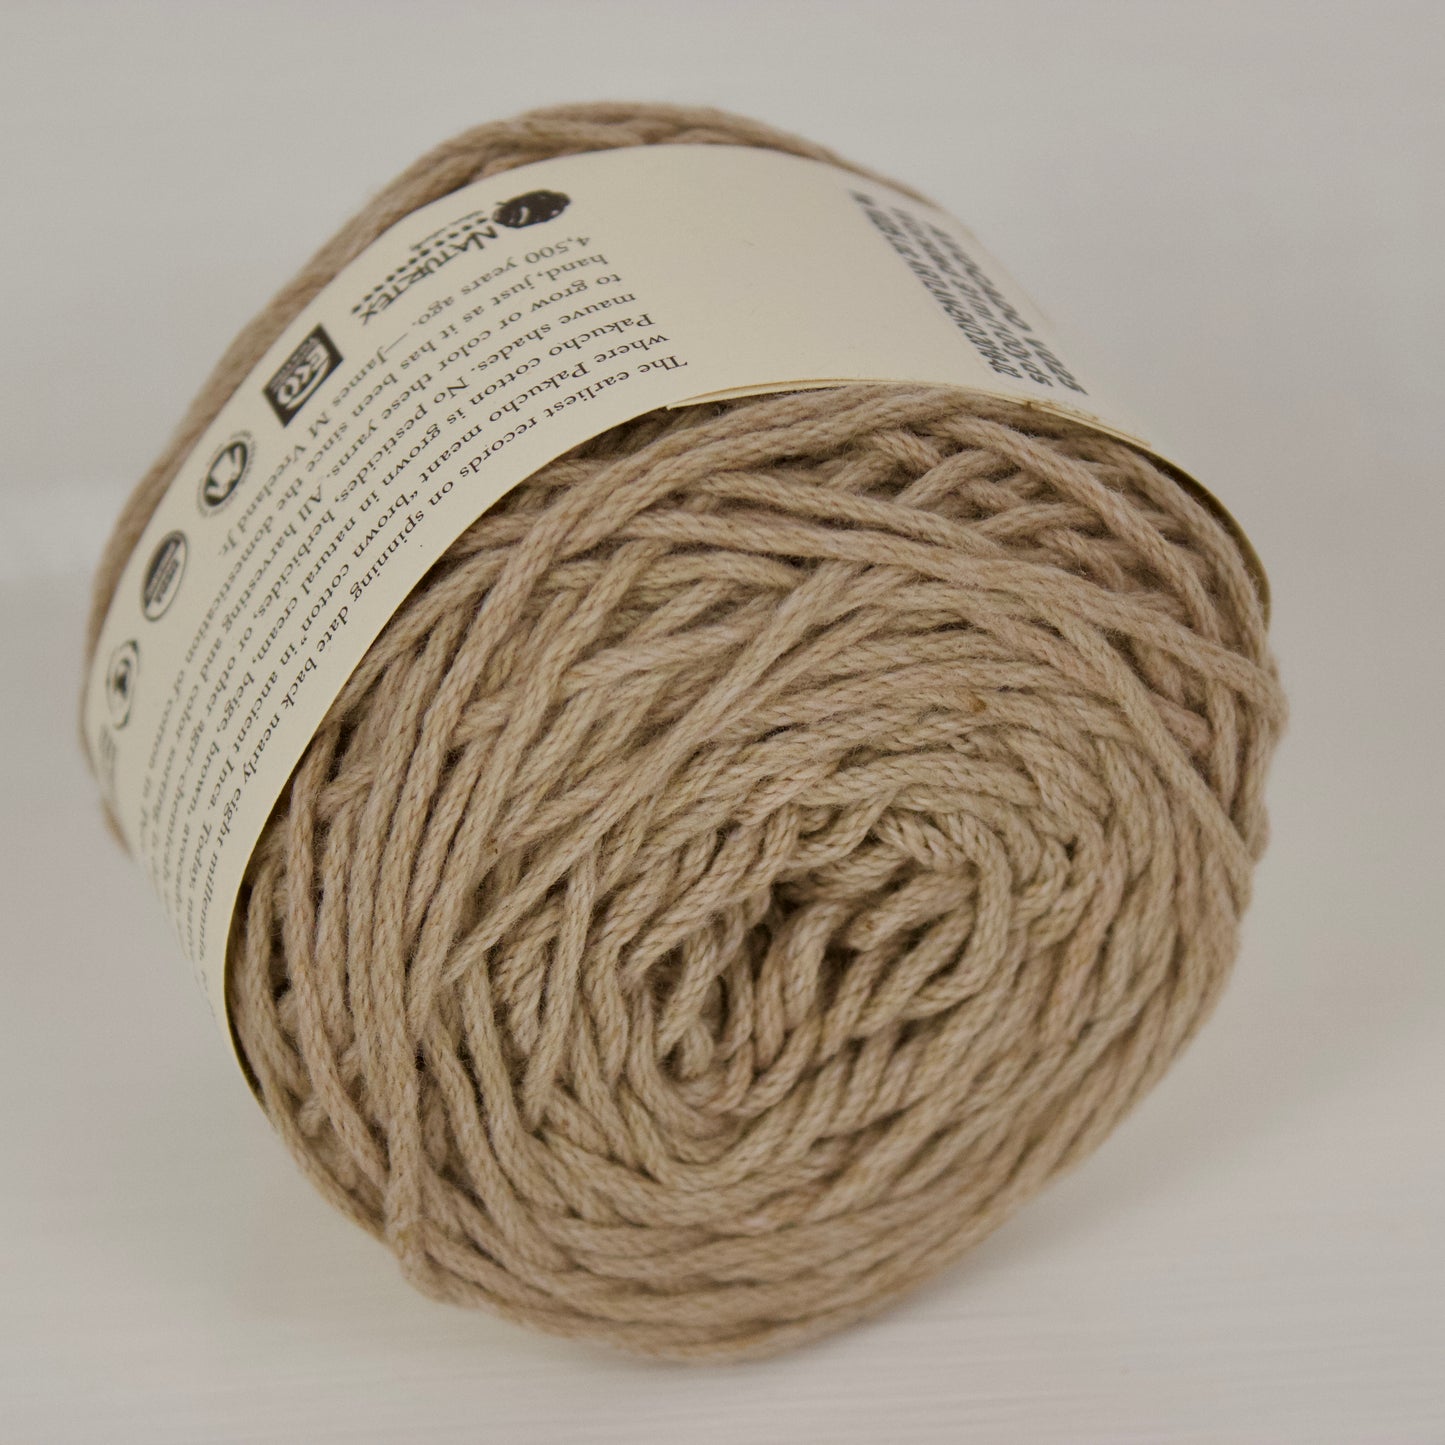 Pakucho Avocado is a natural warm, browny green with a plied texture. It's light and very soft.